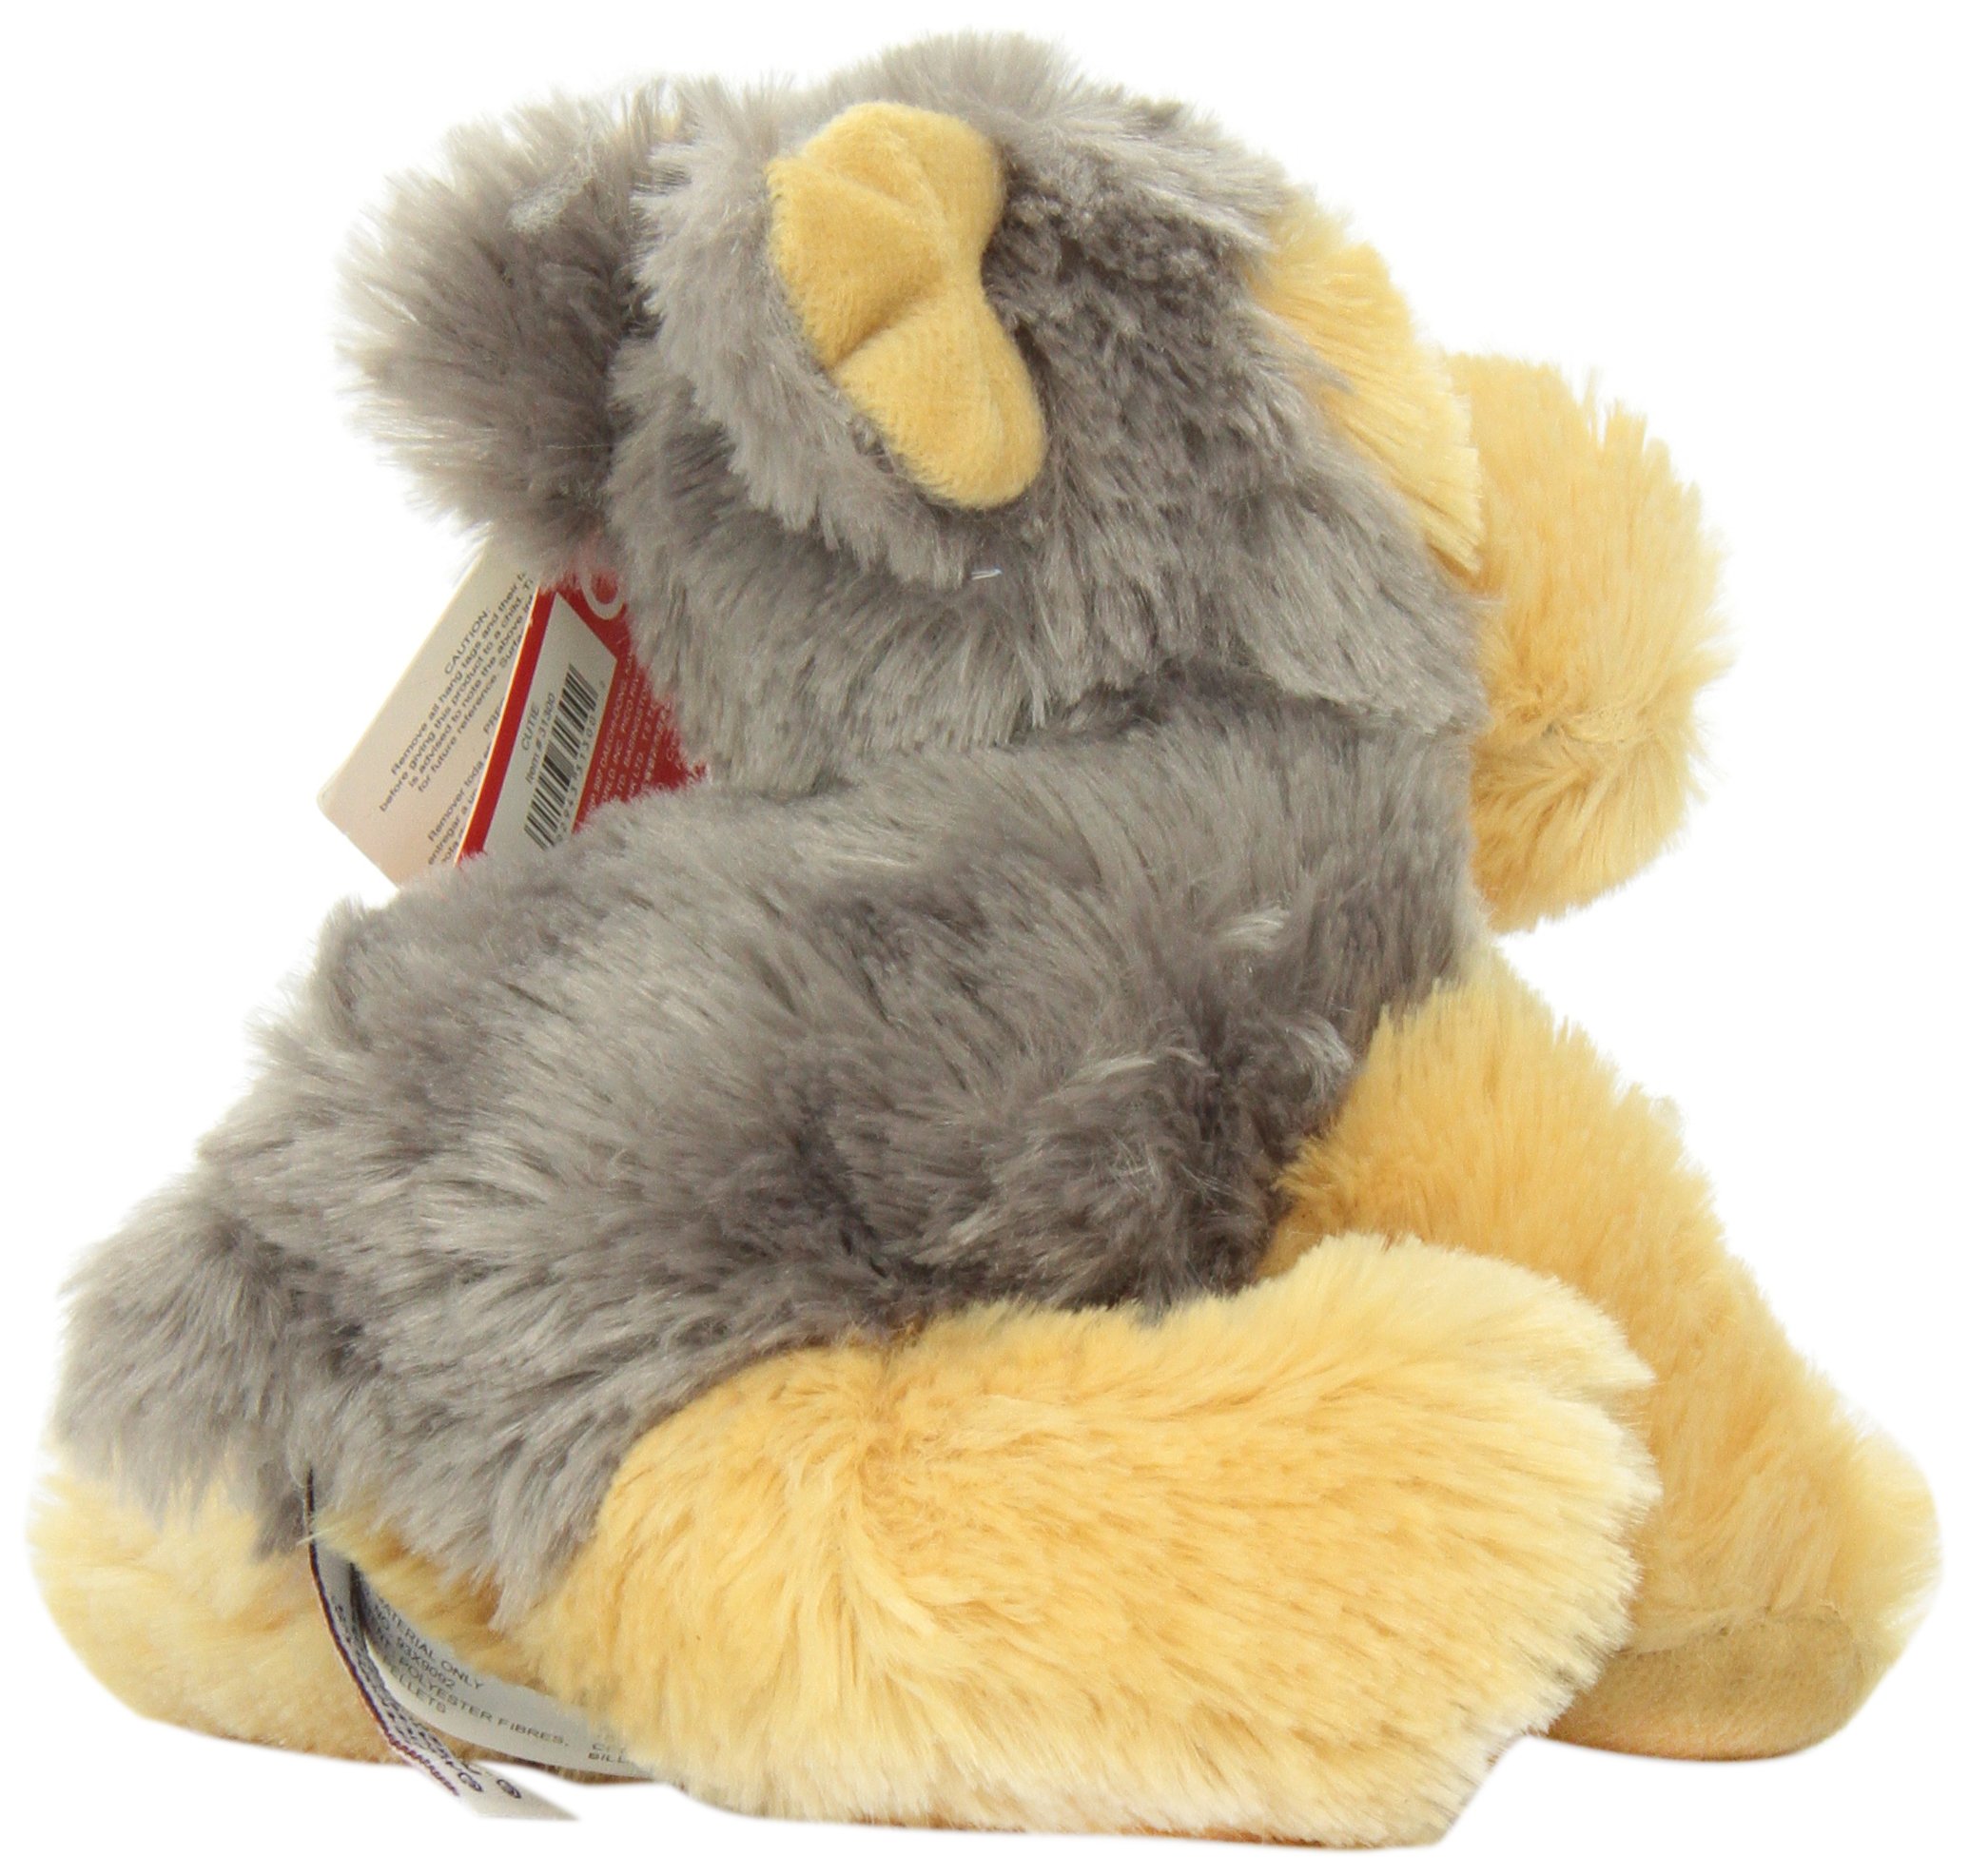 Aurora® Adorable Mini Flopsie™ Cutie™ Stuffed Animal - Playful Ease - Timeless Companions - Gray 8 Inches